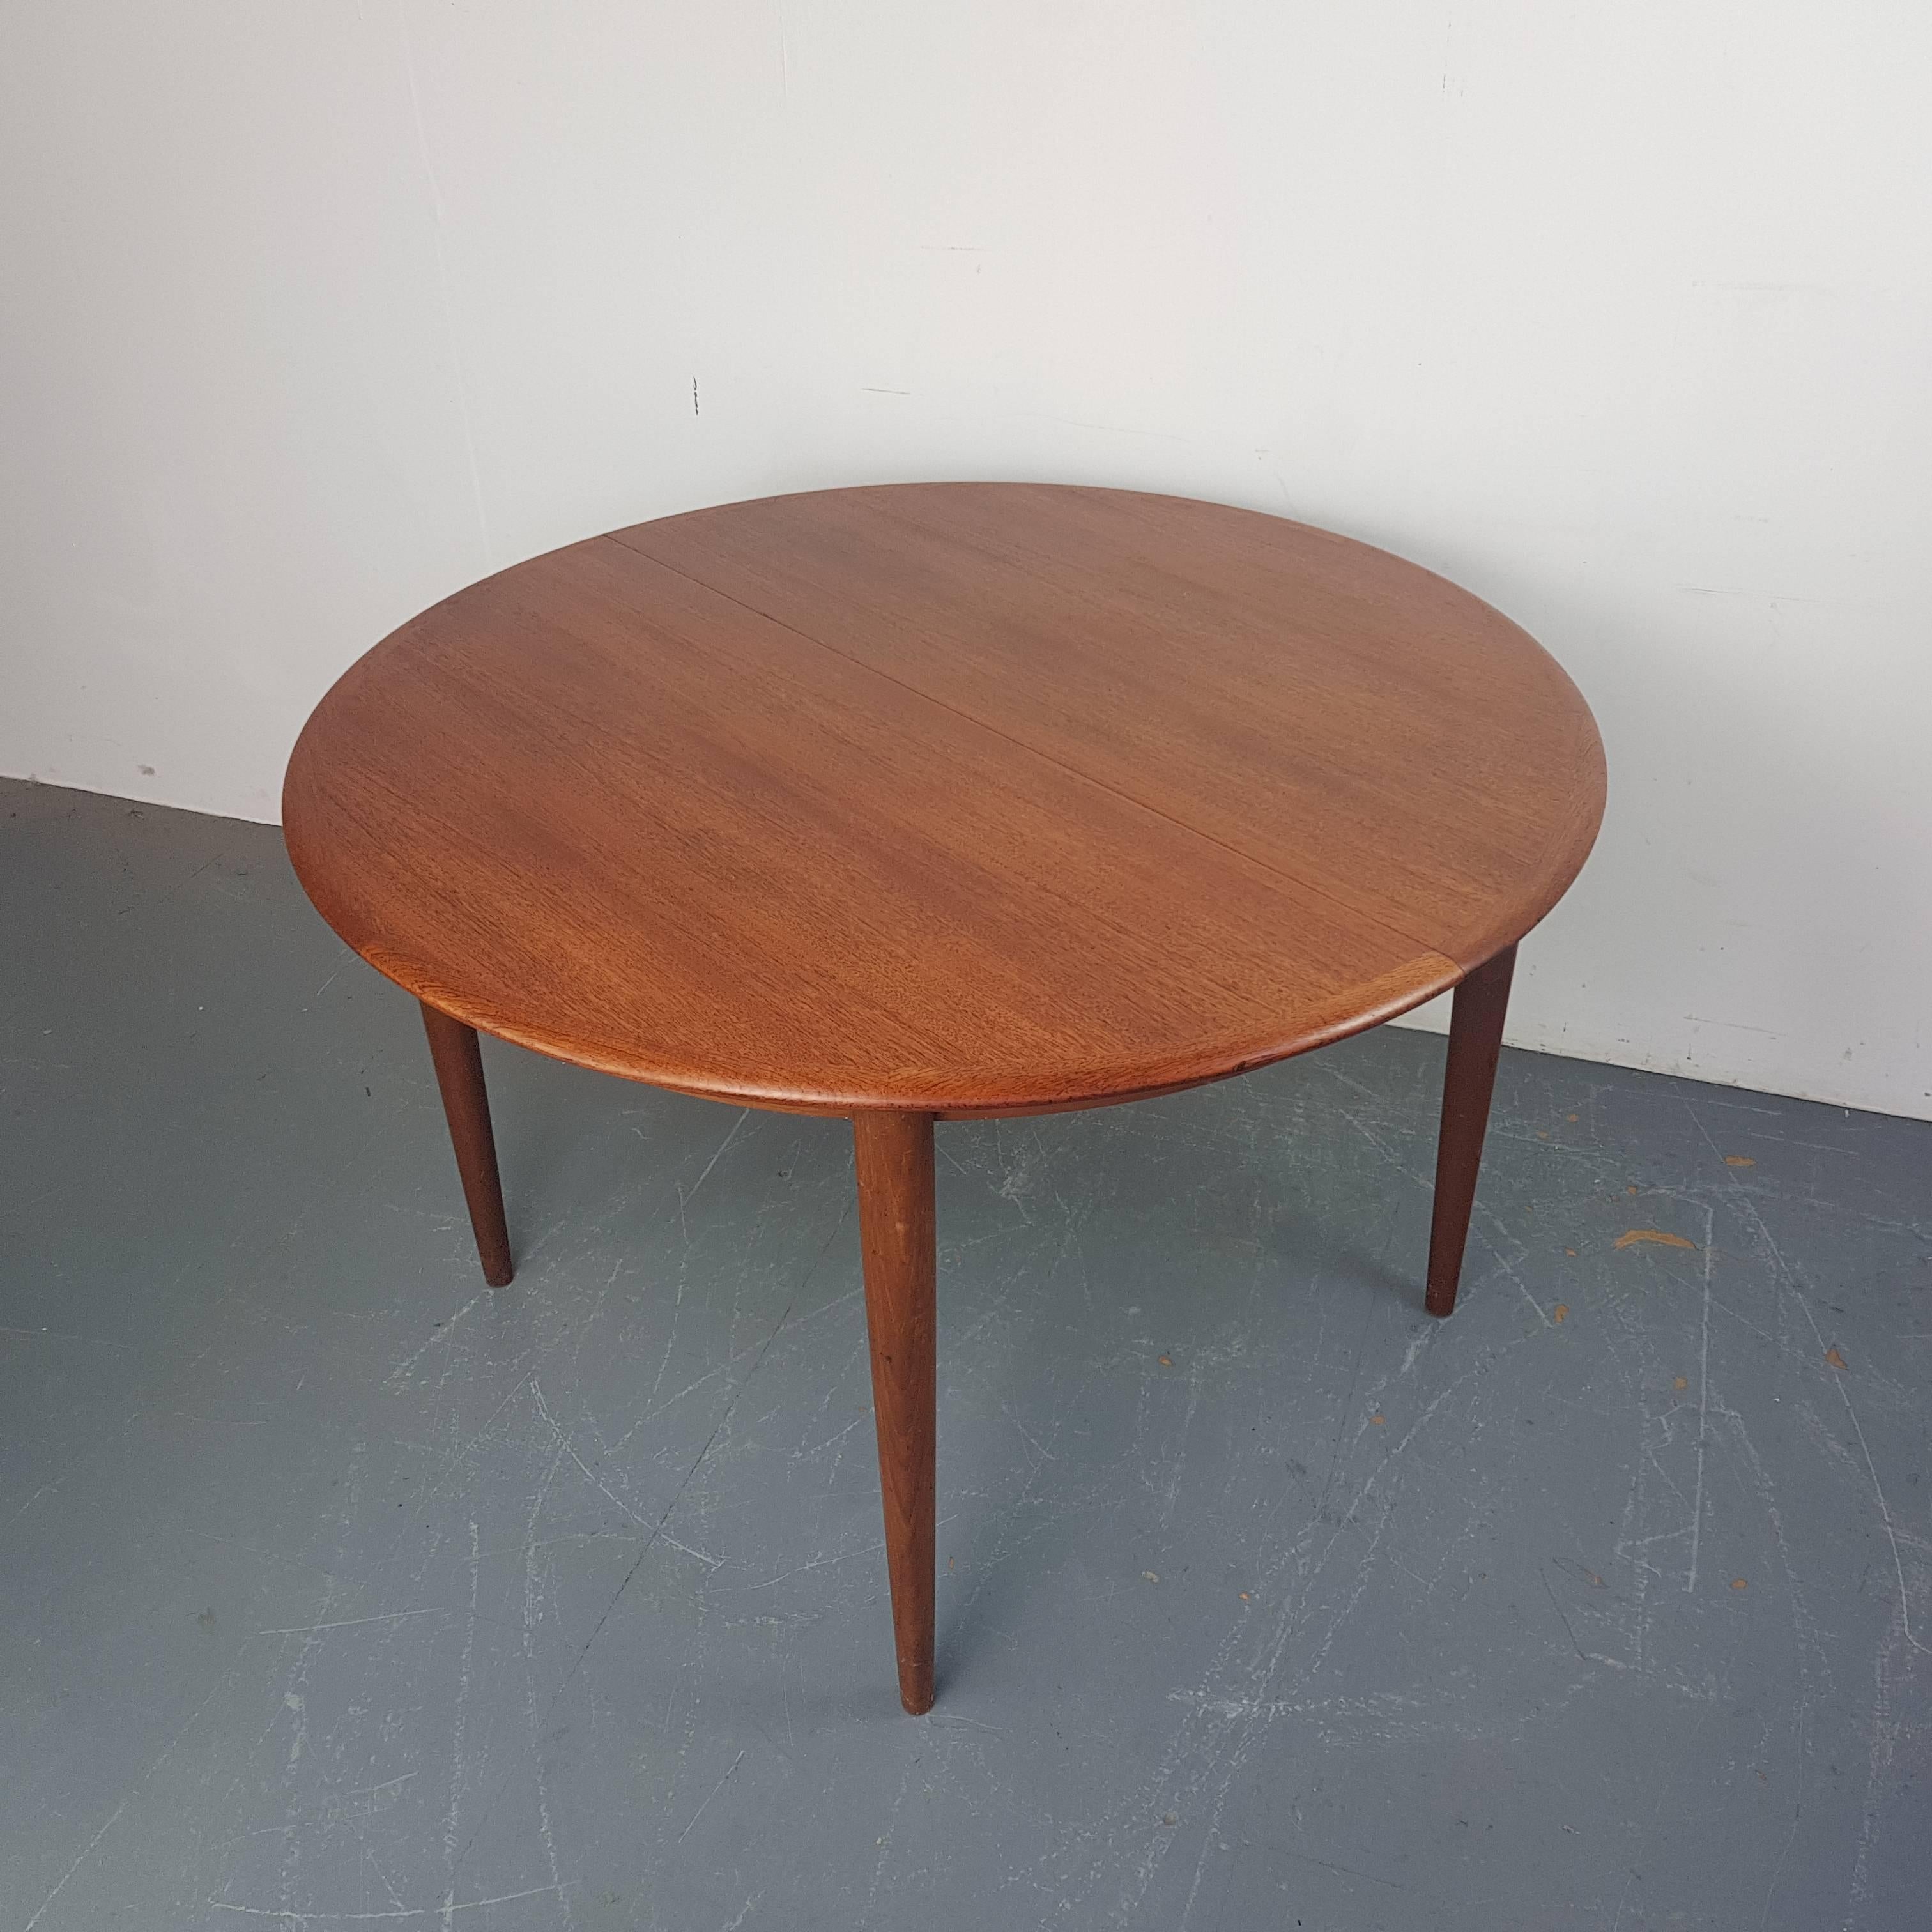 1960s-1970s extending teak dining table made by Skovmand & Andersen, Denmark.  

In very good vintage condition.  It's a vintage item, so has some general age-related wear, but nothing specific to mention.

With two leafs, this can be extended